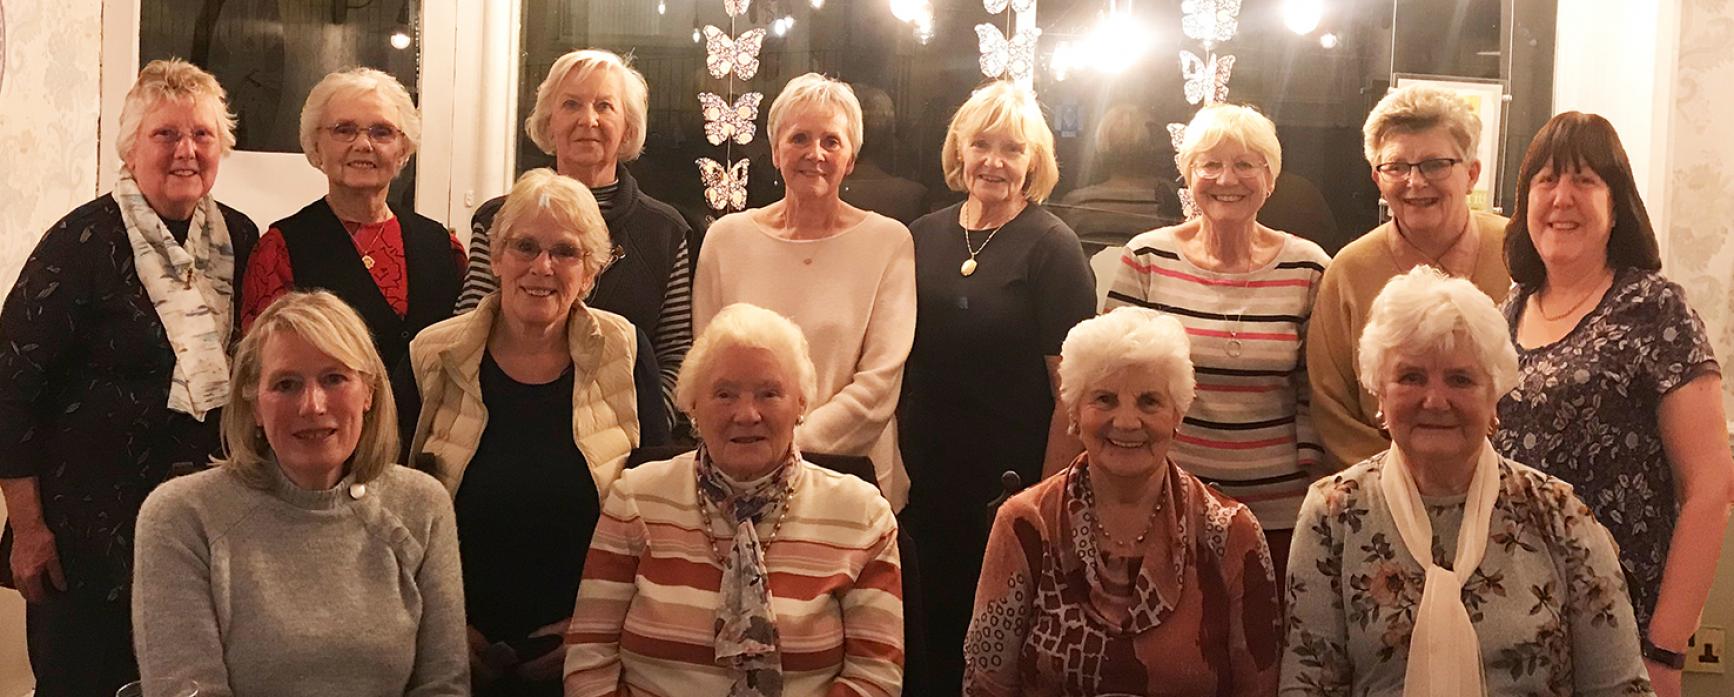 PARTY TIME: Members of the St Mary’s Flower Guild, in Barnard Castle, held their annual meeting and dinner at the Old Well Inn